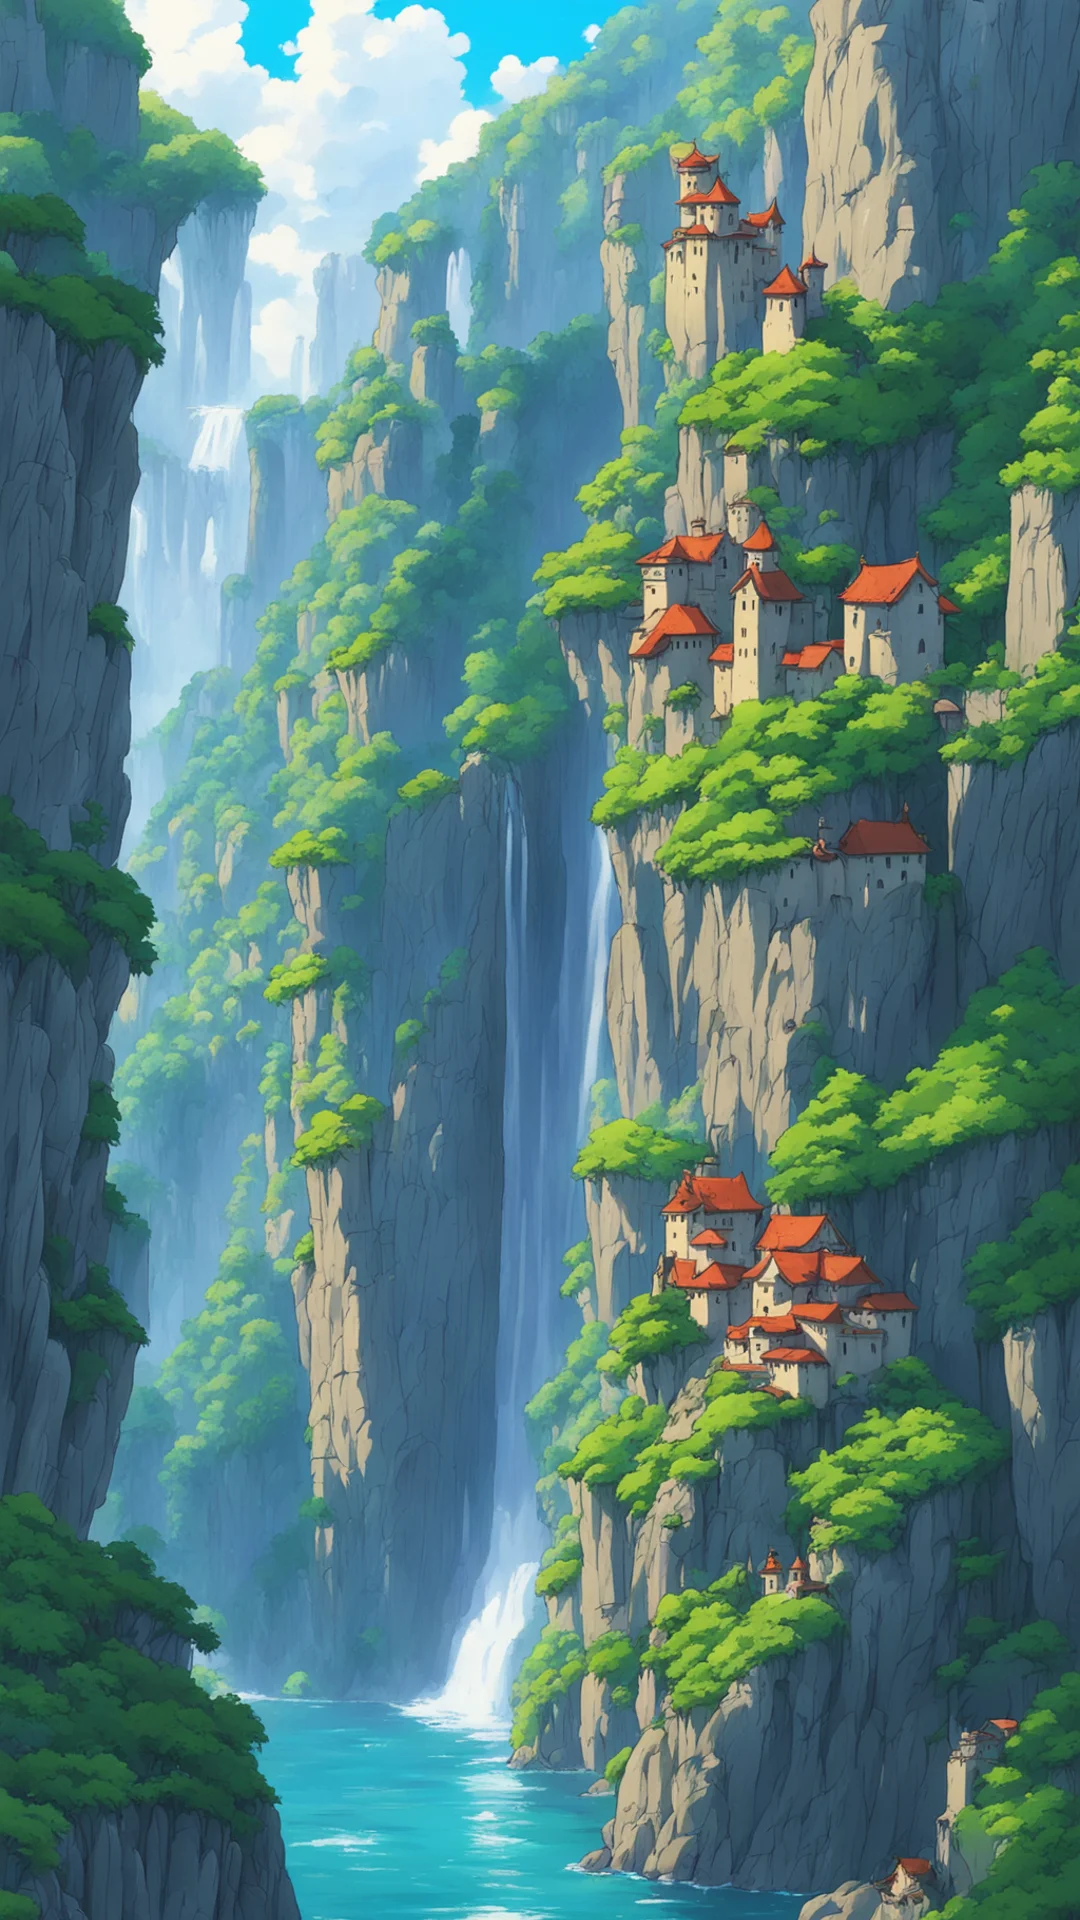 airelaxing castle beautiful cliffs and waterfalls ghibli anime amazing awesome portrait 2 tall